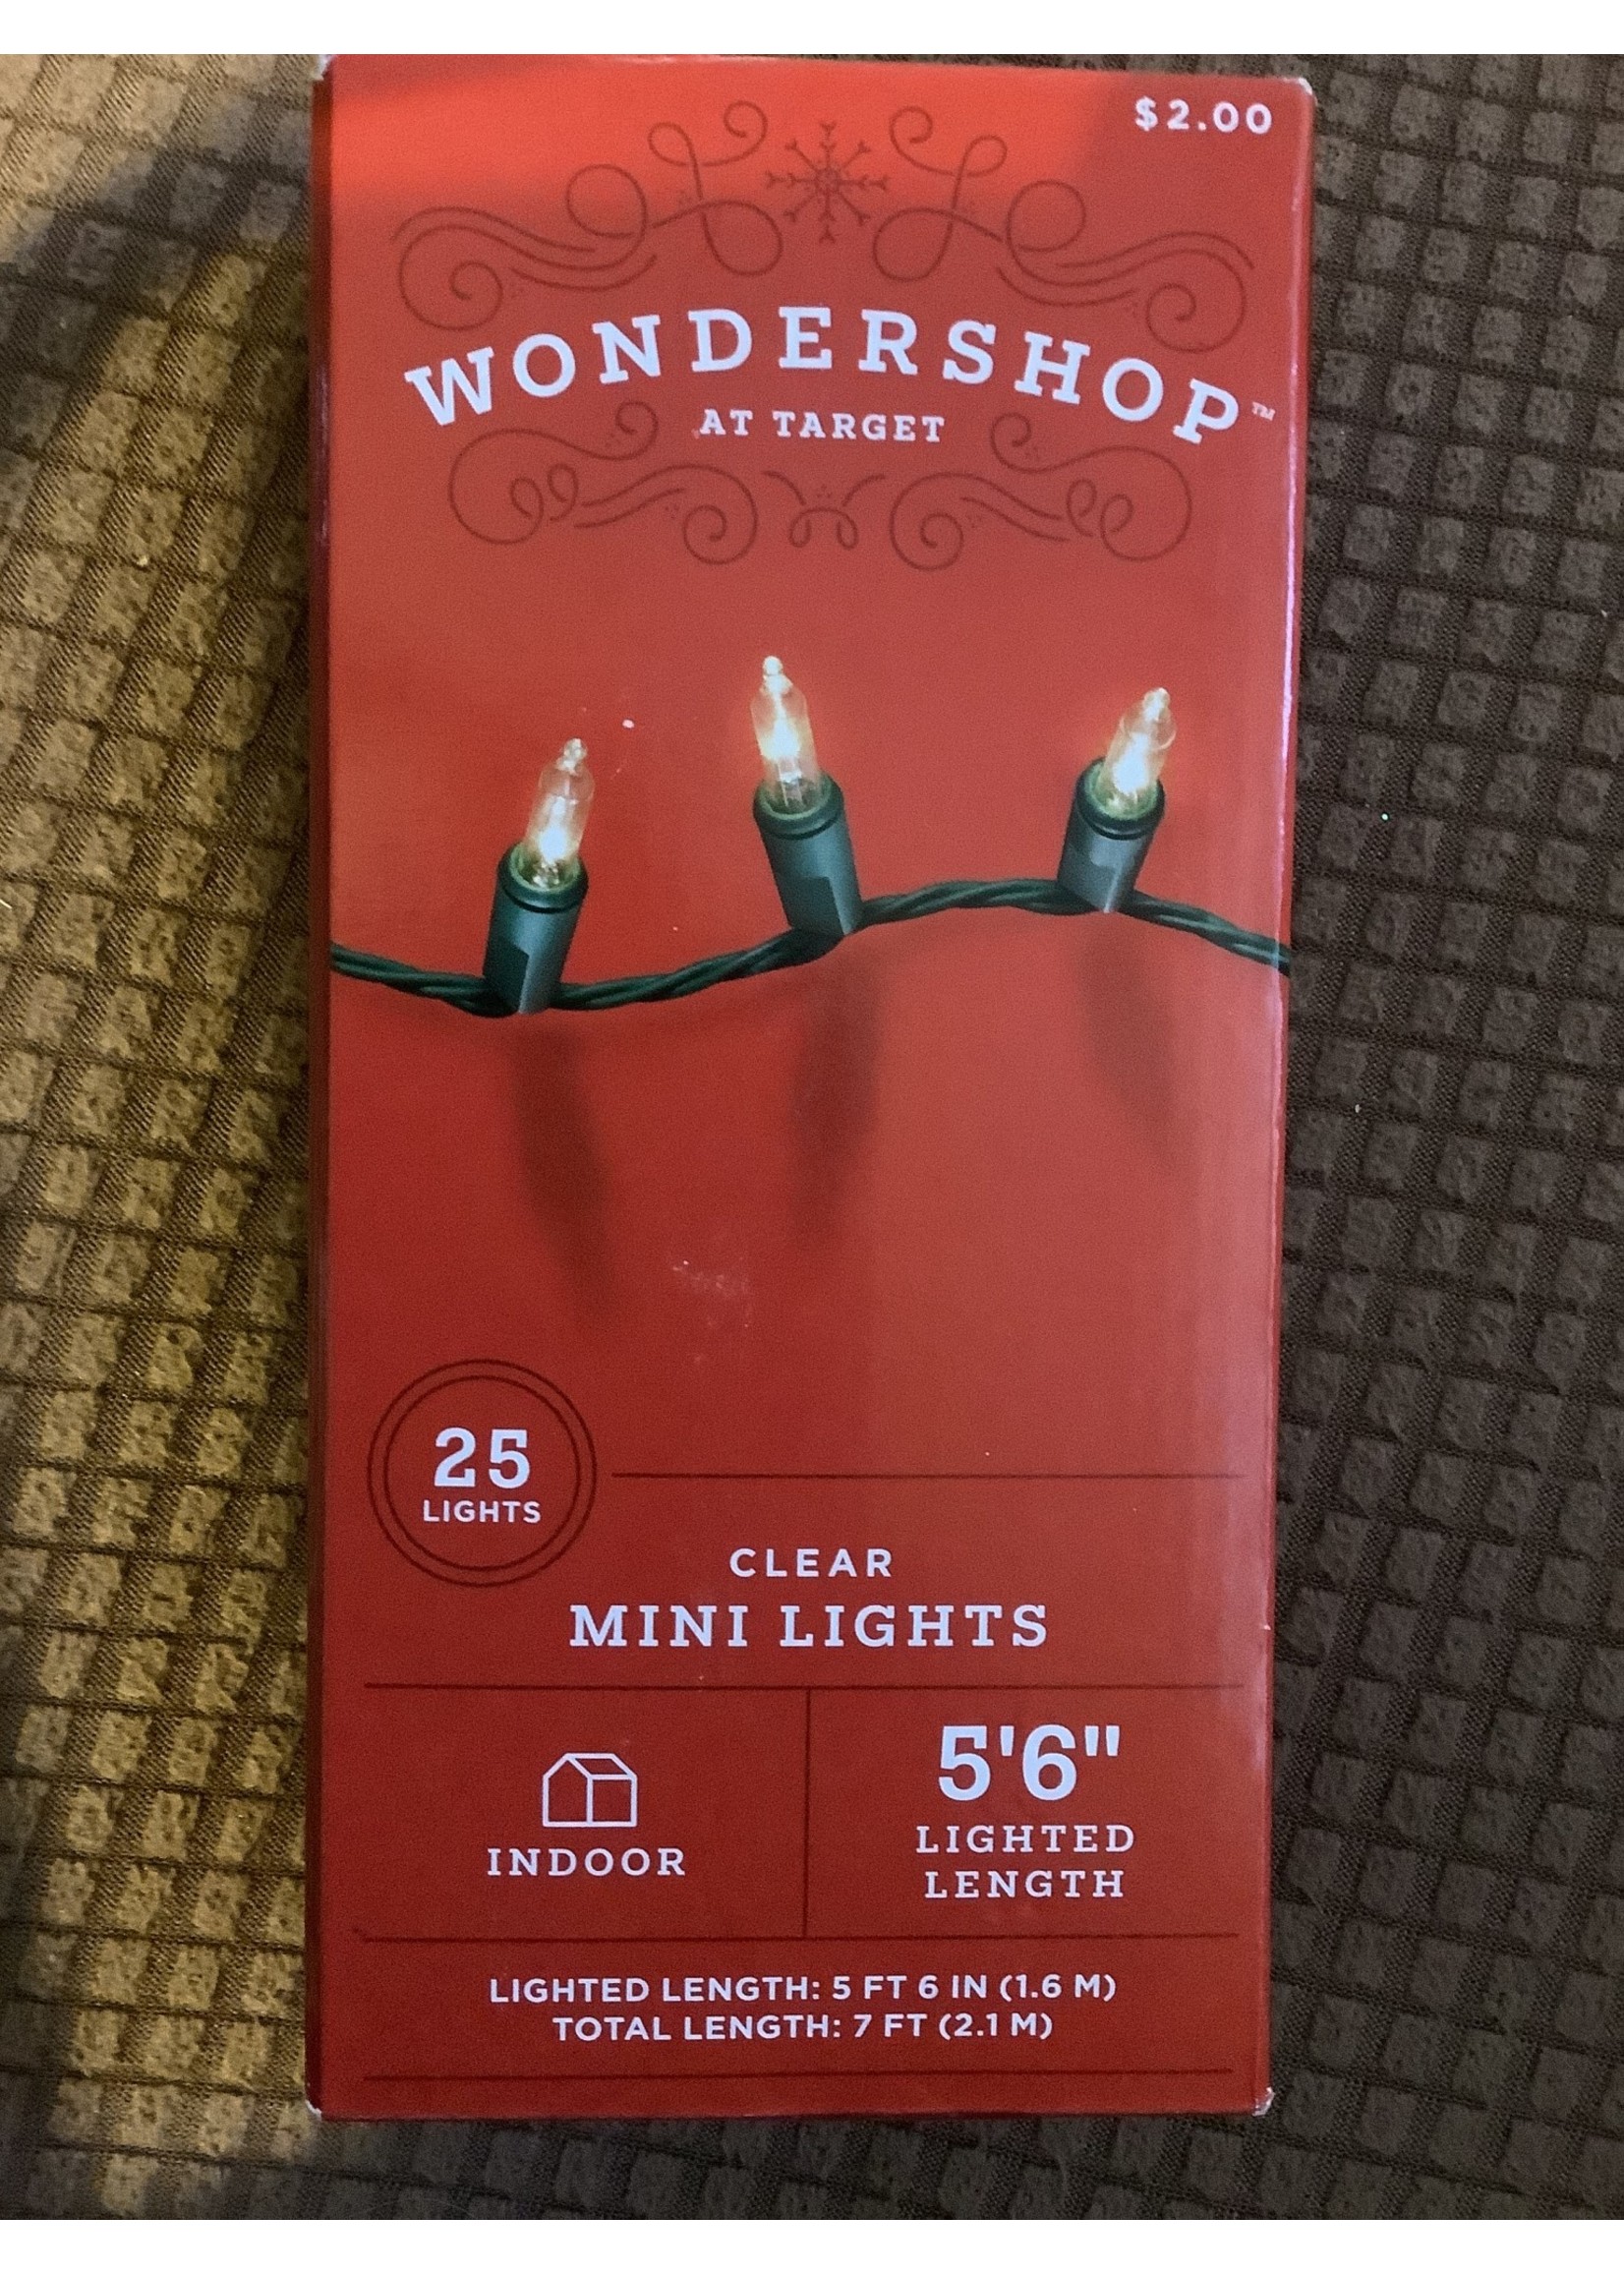 25 Mini lights Clear with green wire Wondershop